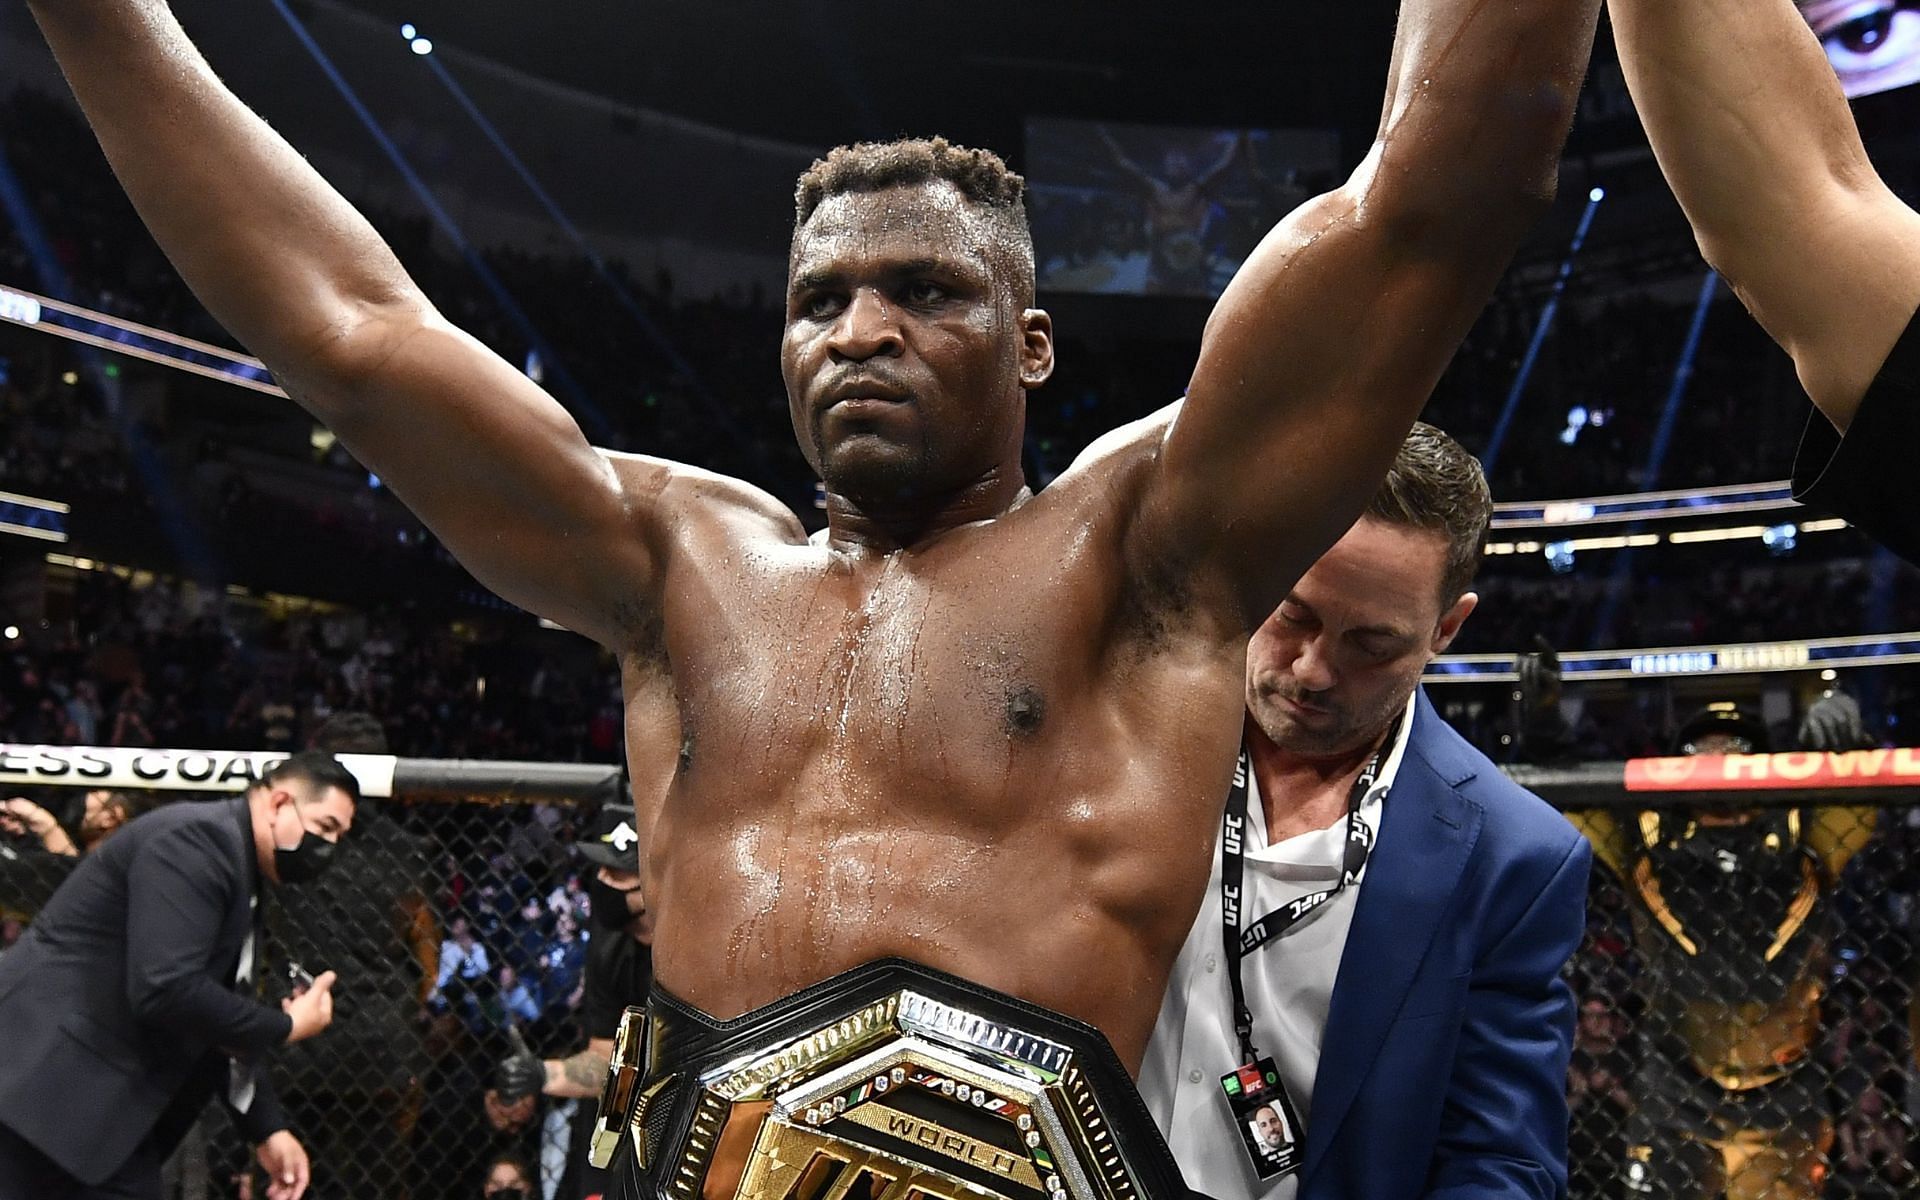 Mick Maynard presented Francis Ngannou with his world title after he defeated Ciryl Gane at UFC 270 [Image via @SpinninBackfist on Twitter]